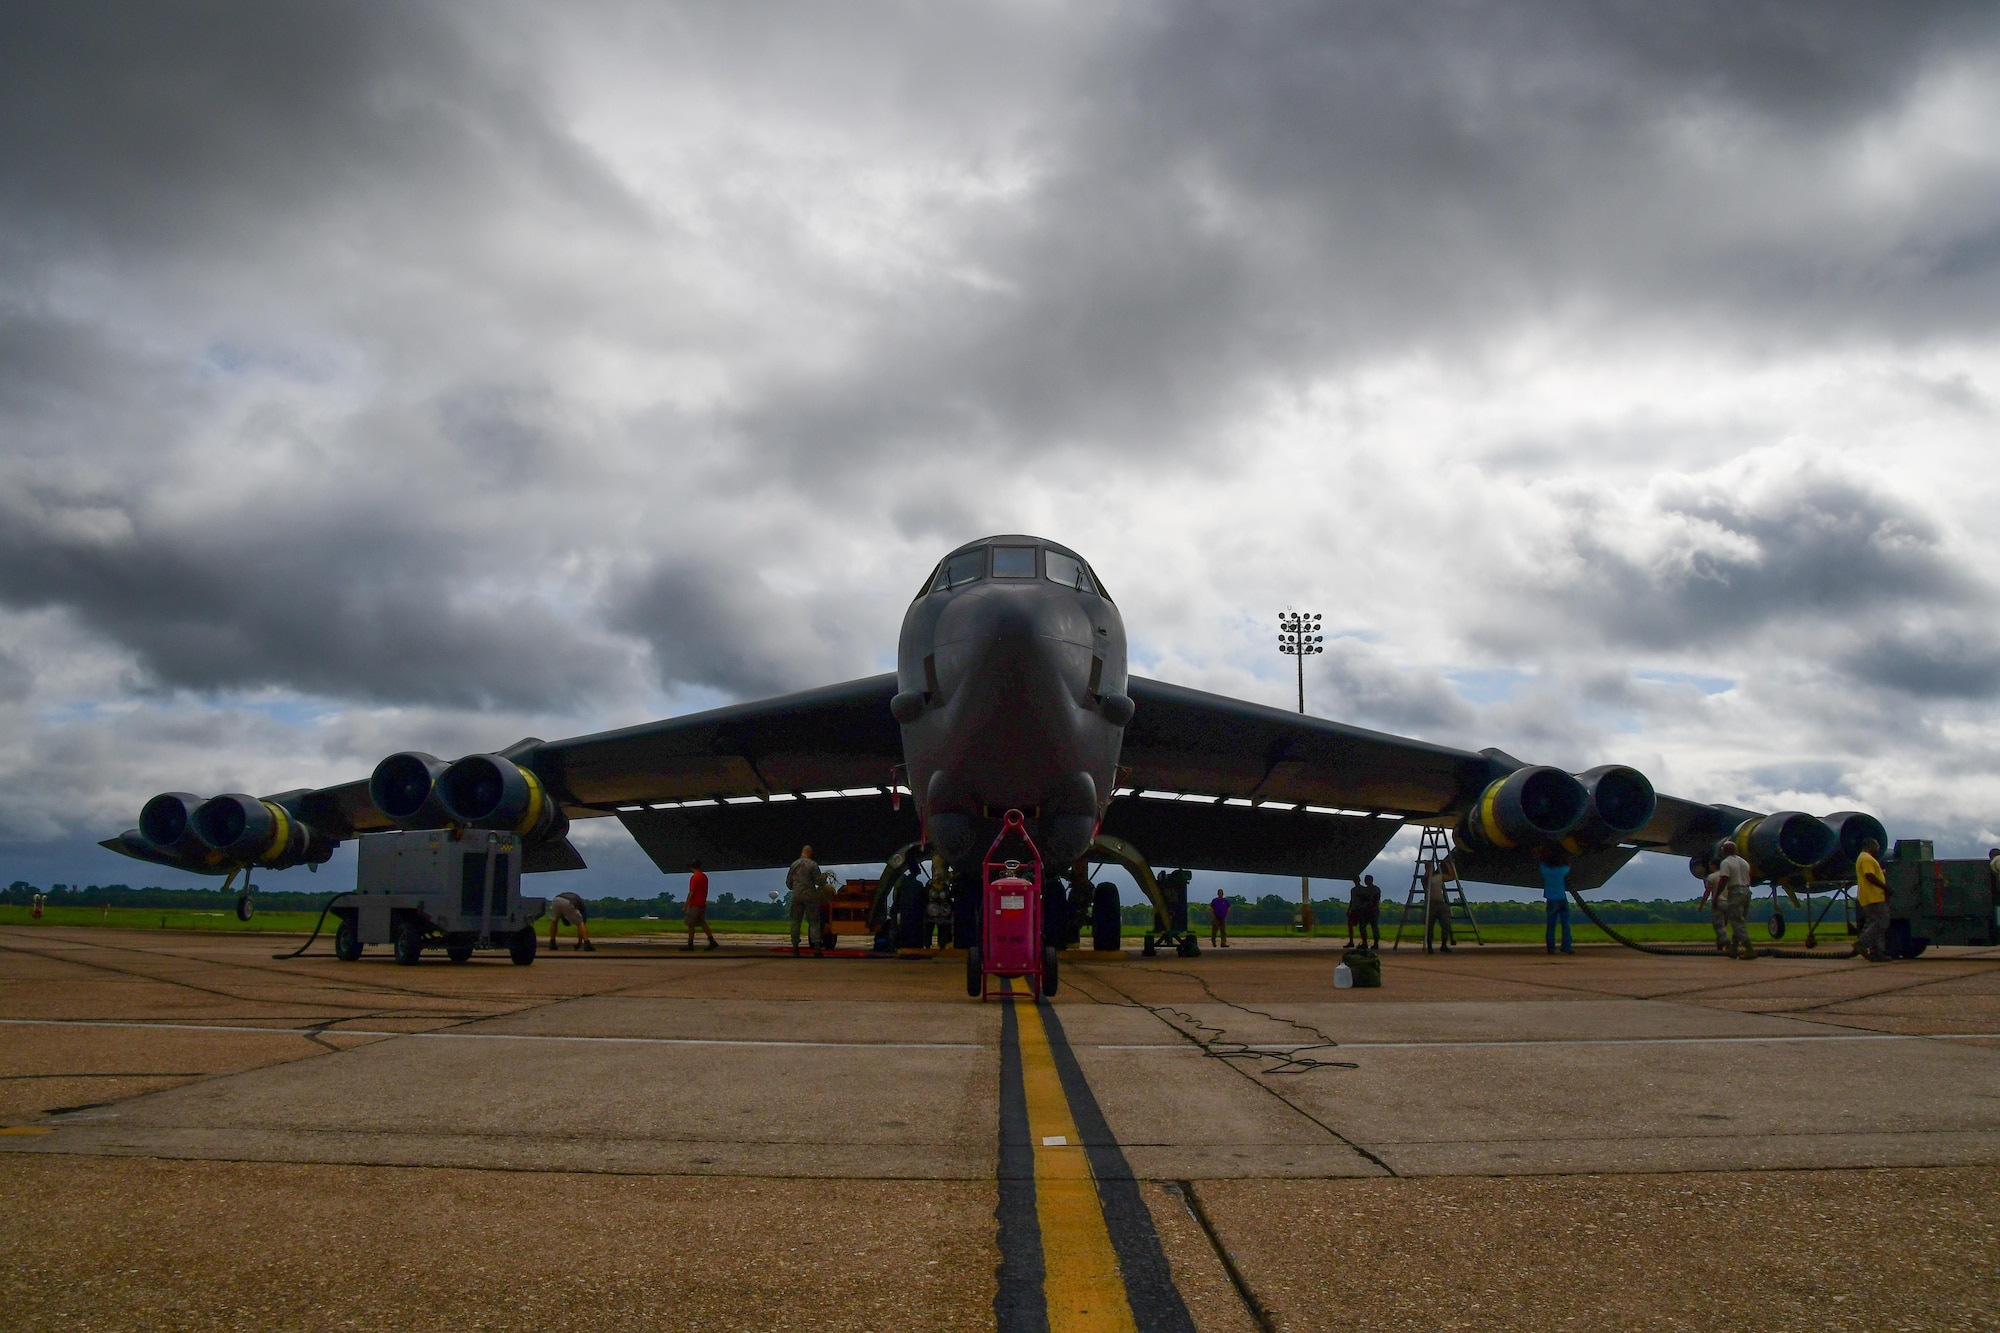 Airmen assigned to the 307th Maintenance Squadron prepare a B-52 Stratofortress for an engine run during a phase inspection of the bomber on Barksdale Air Force Base, La. June 29, 2017. It takes 19 different shops and around 25 days to complete the phase inspection with the engine run being one of the final parts. (U.S. Air Force photo by Master Sgt. Dachelle Melville/Released)